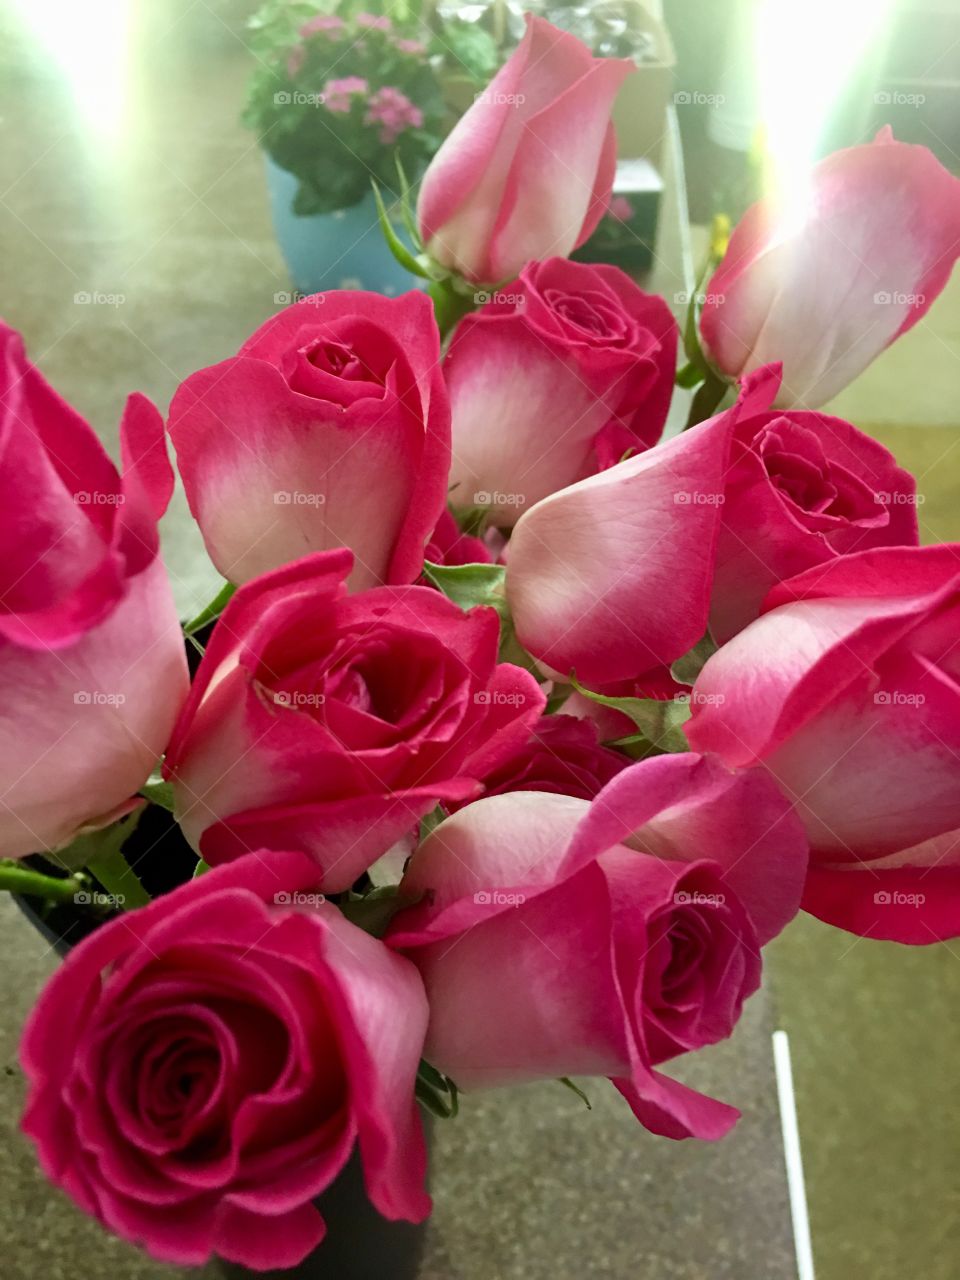 Hot pink roses 